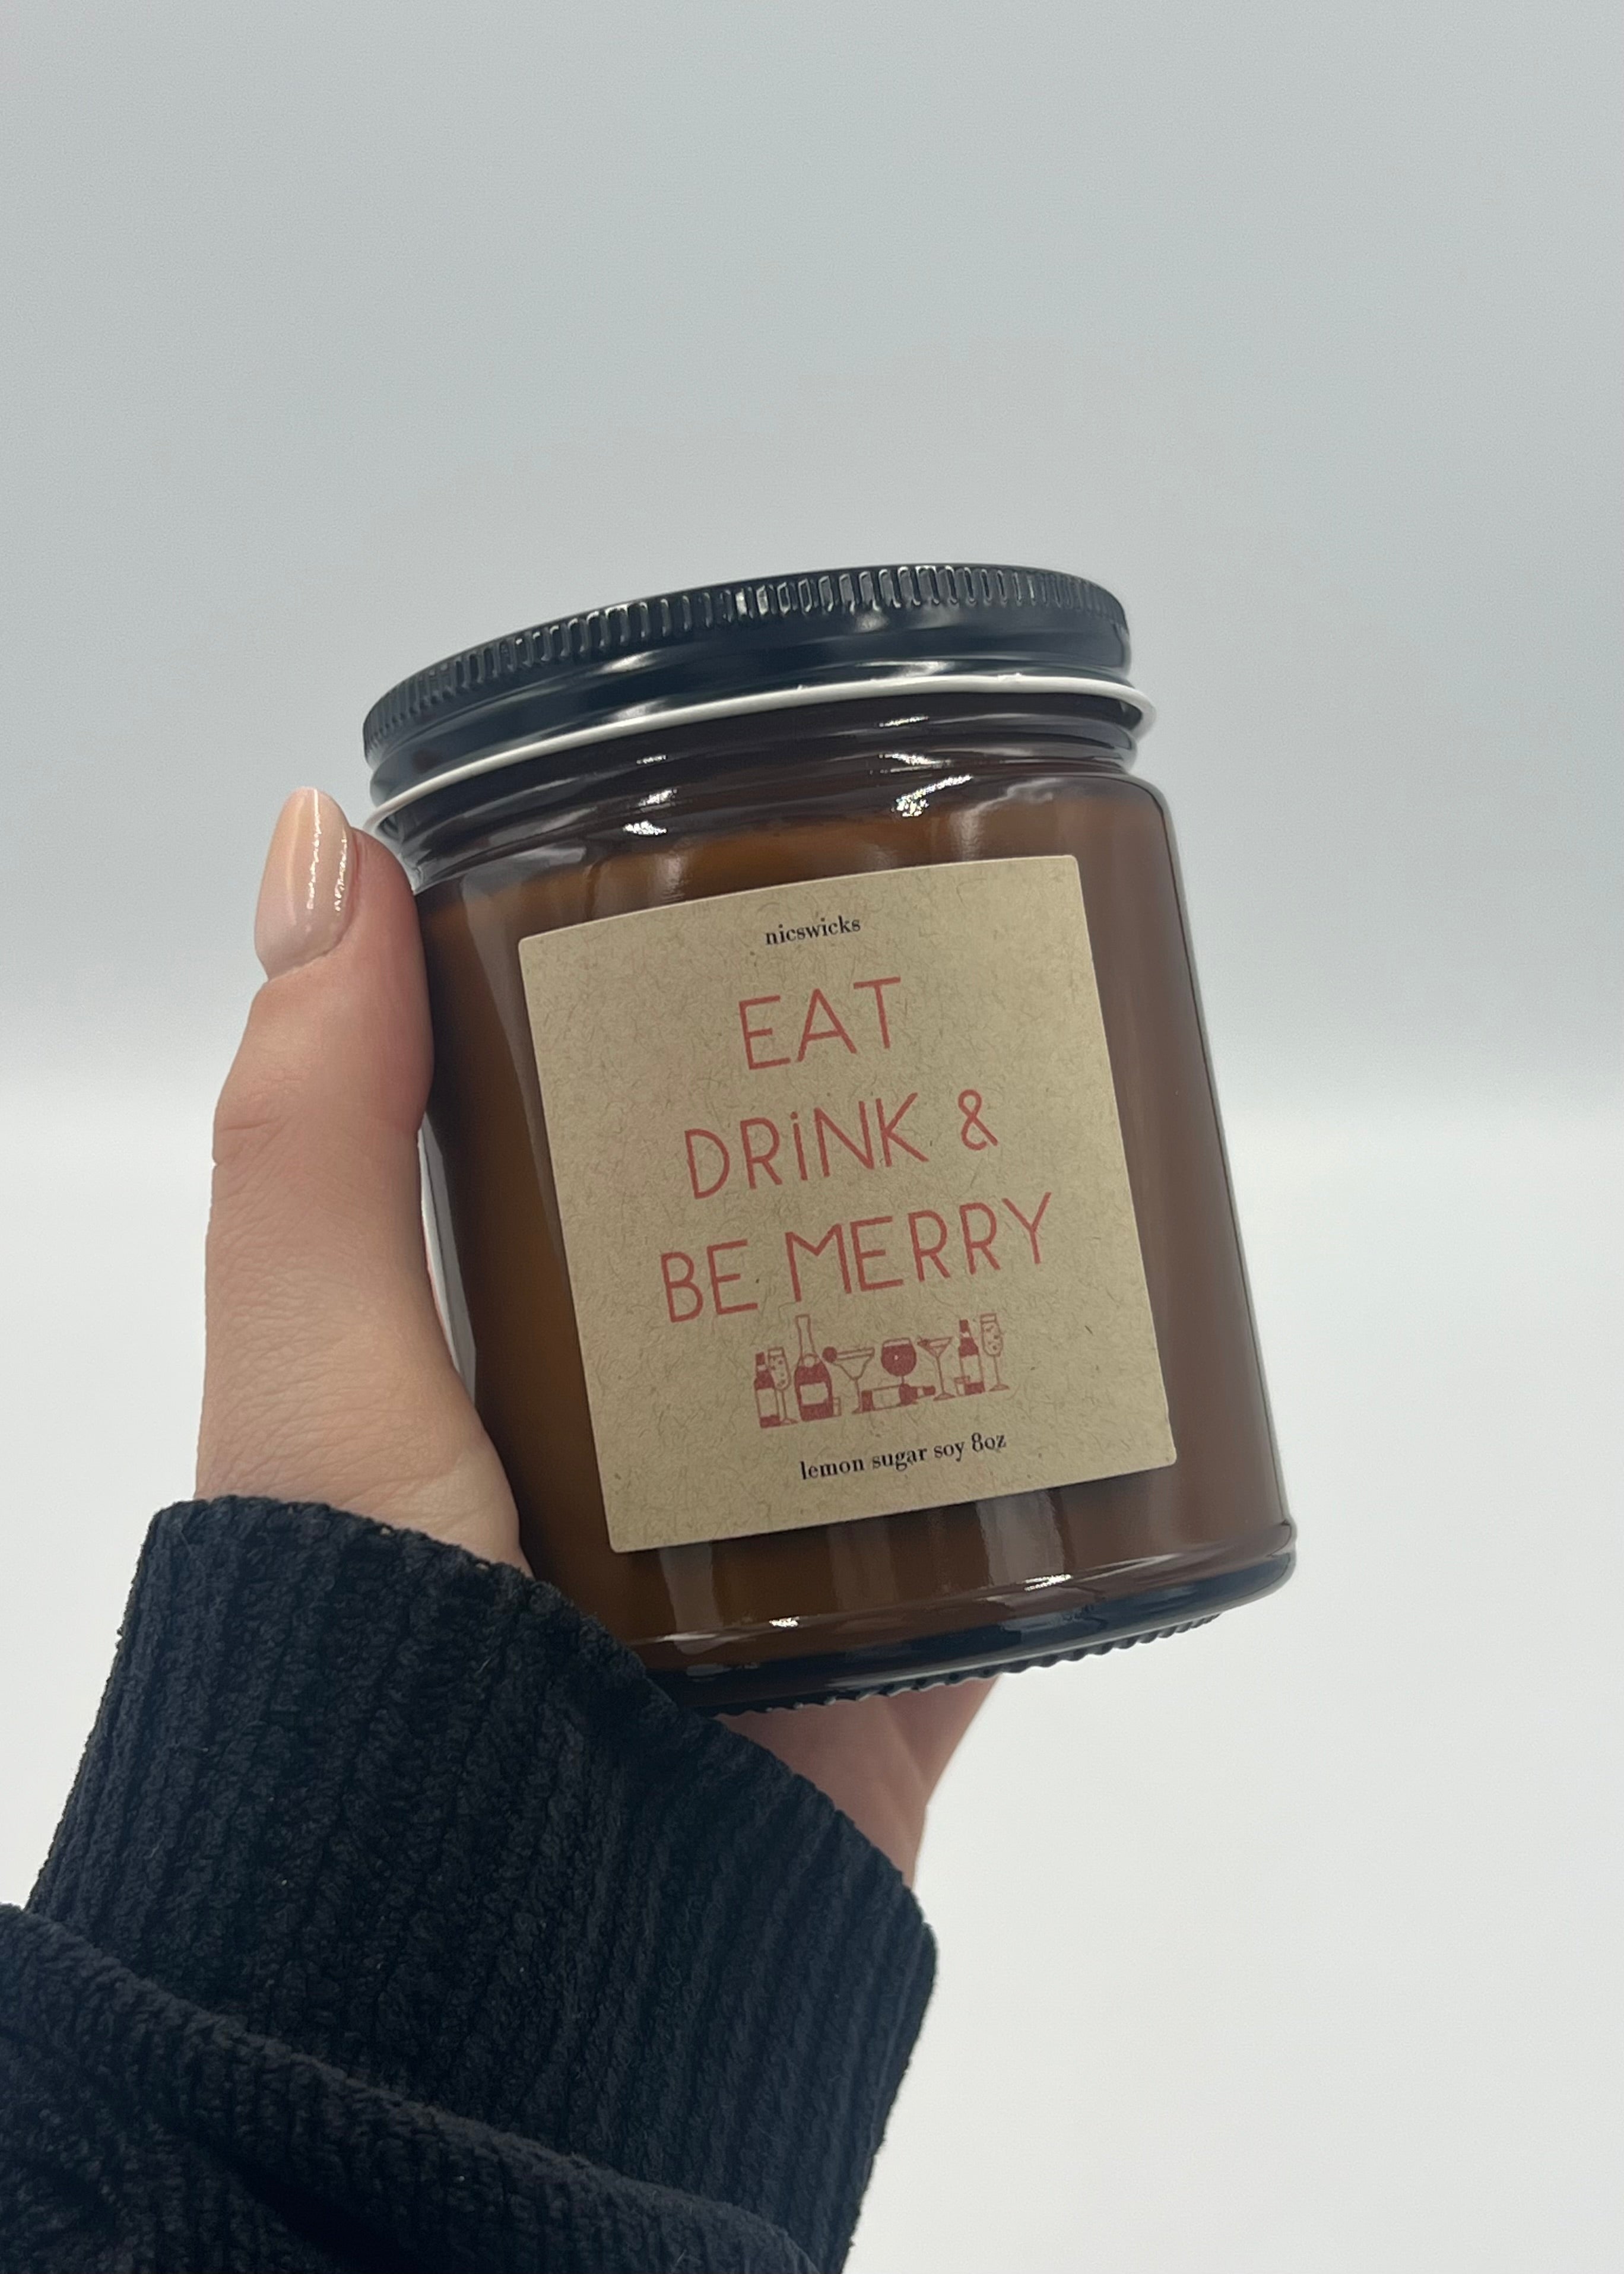 Candle - Eat Drink & Be Merry 8oz